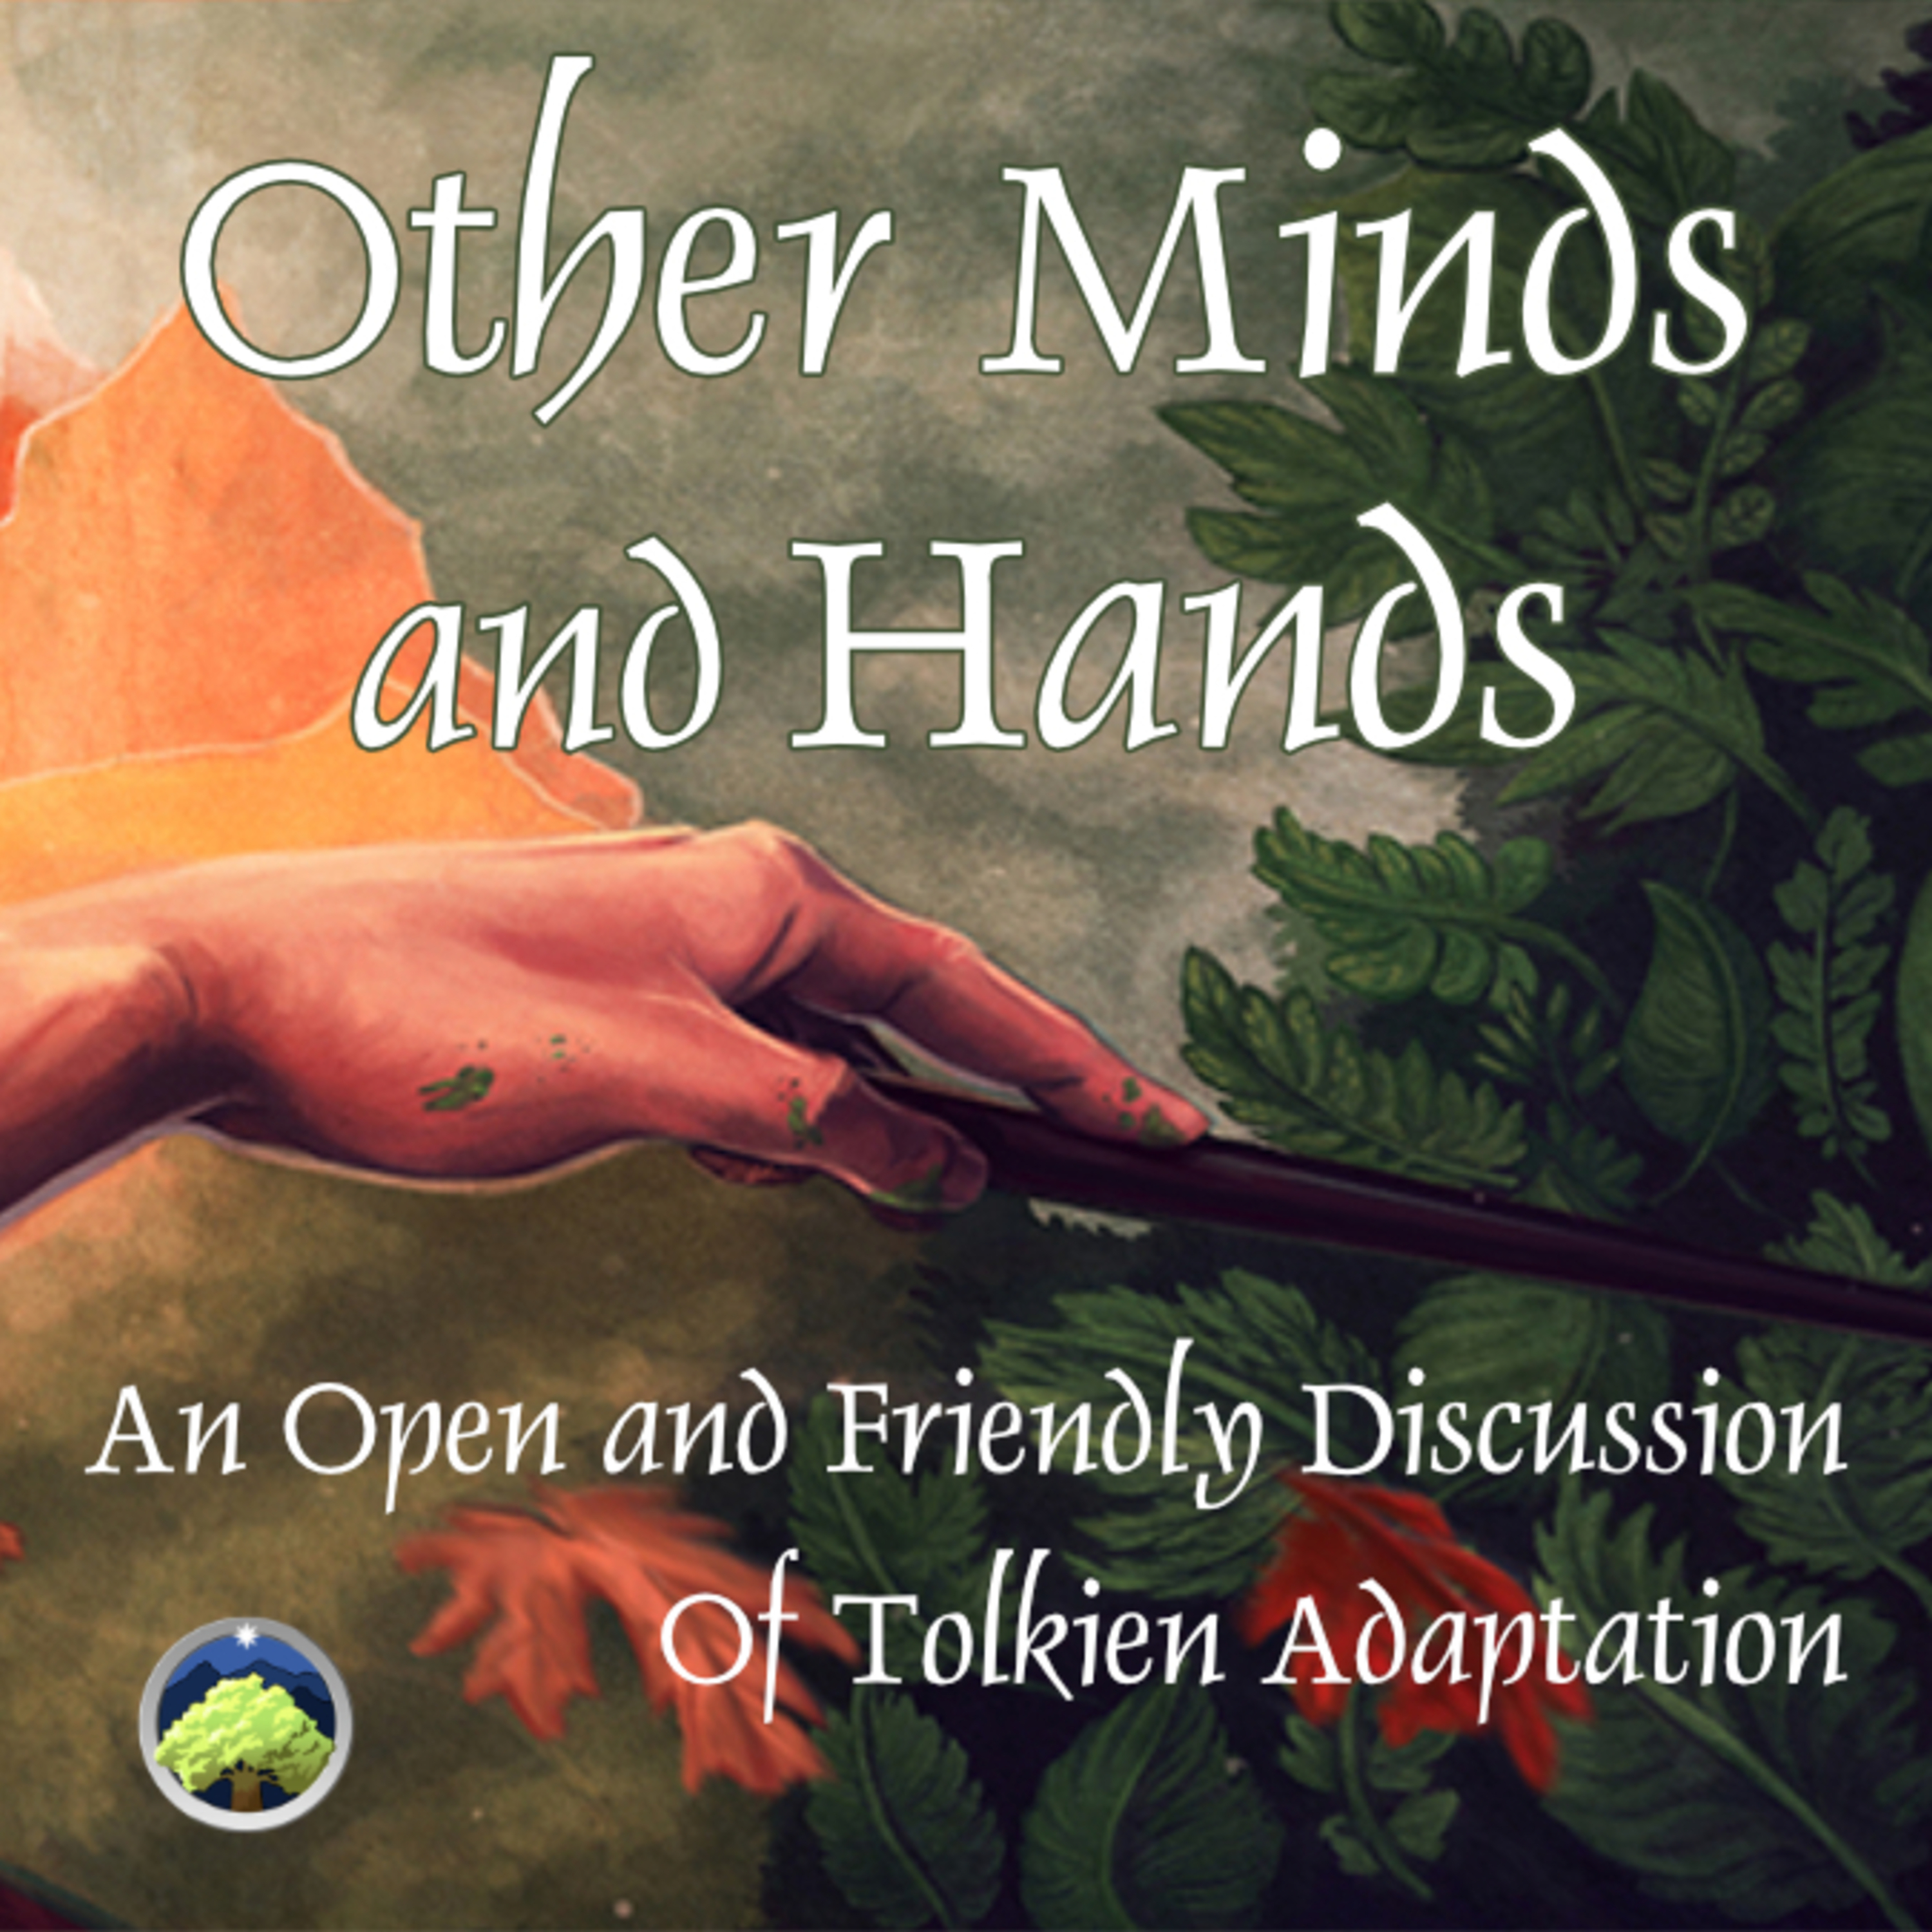 558: Other Minds and Hands, Episode 62